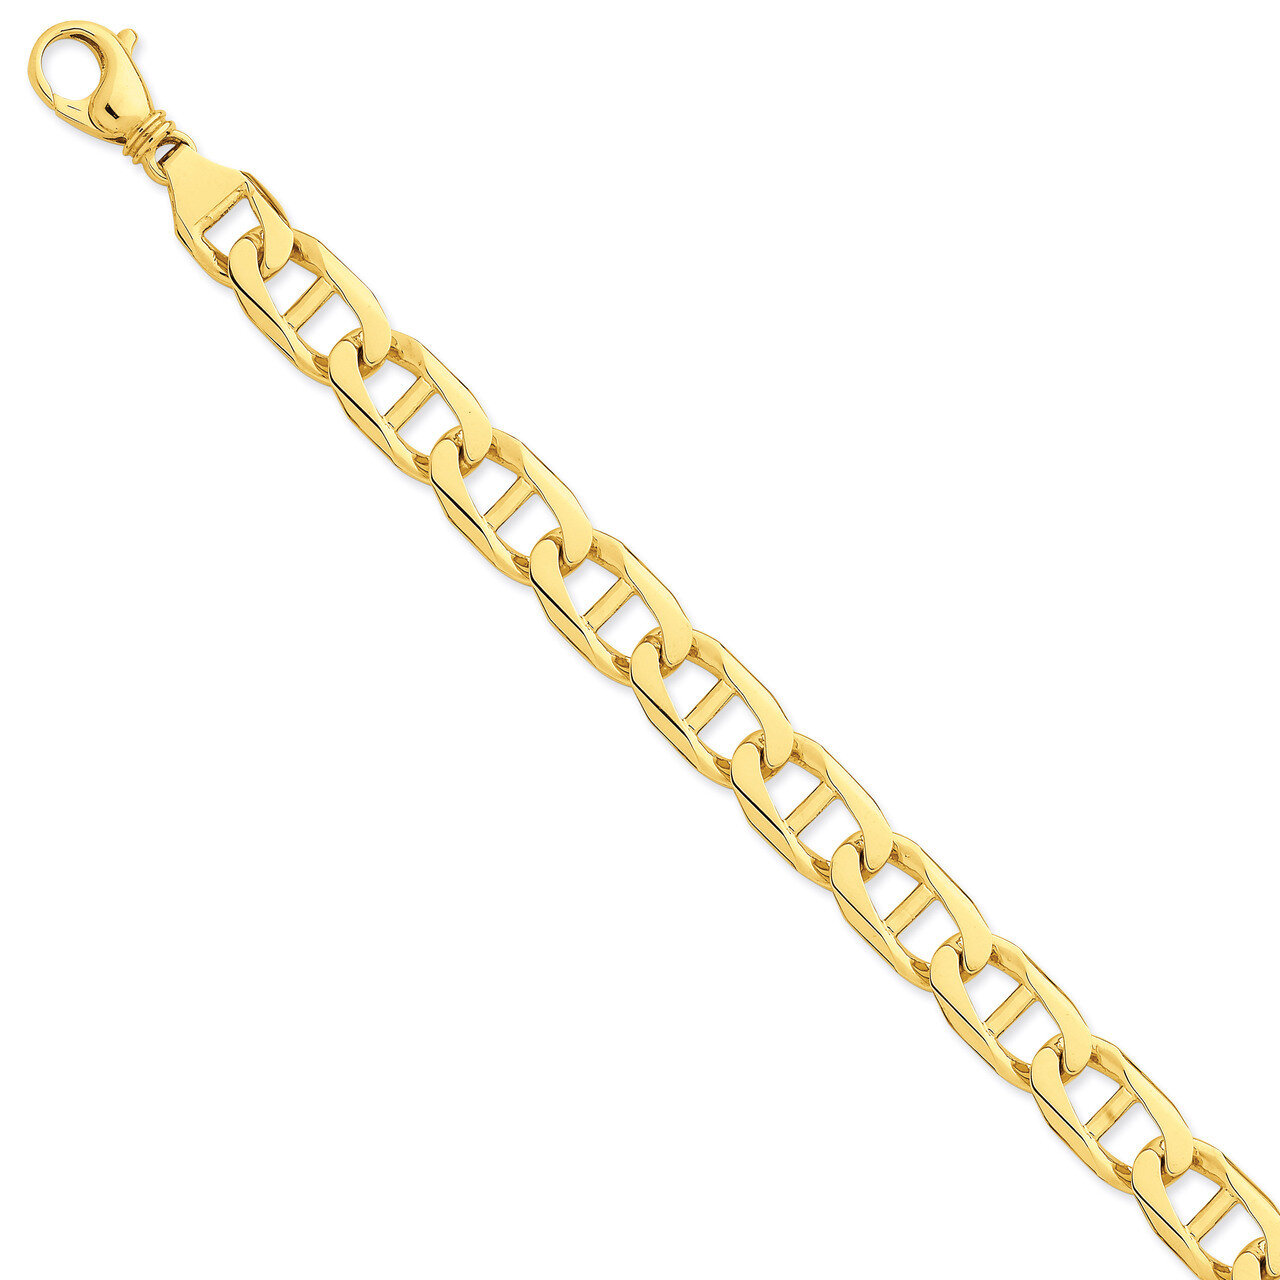 11mm Hand-polished Anchor Link Chain 8 Inch 14k Gold LK102-8